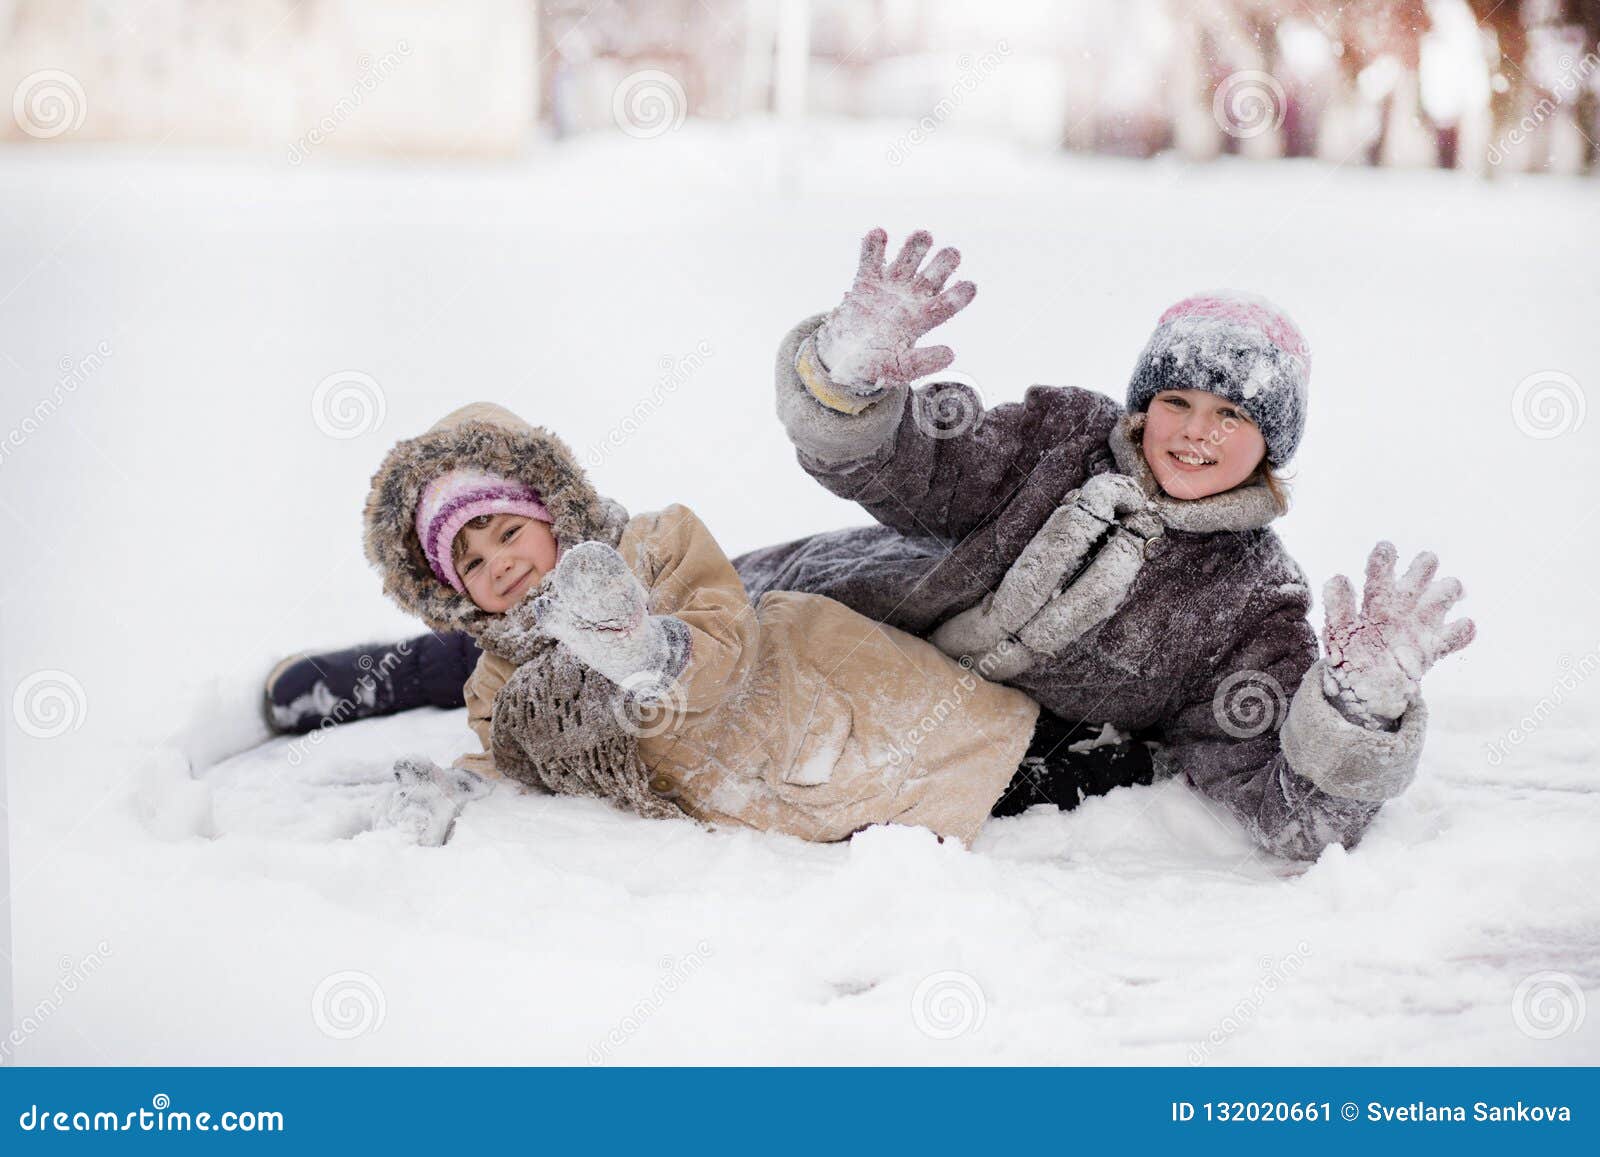 Funny Winter Stock Images - Download 93,816 Royalty Free -8212